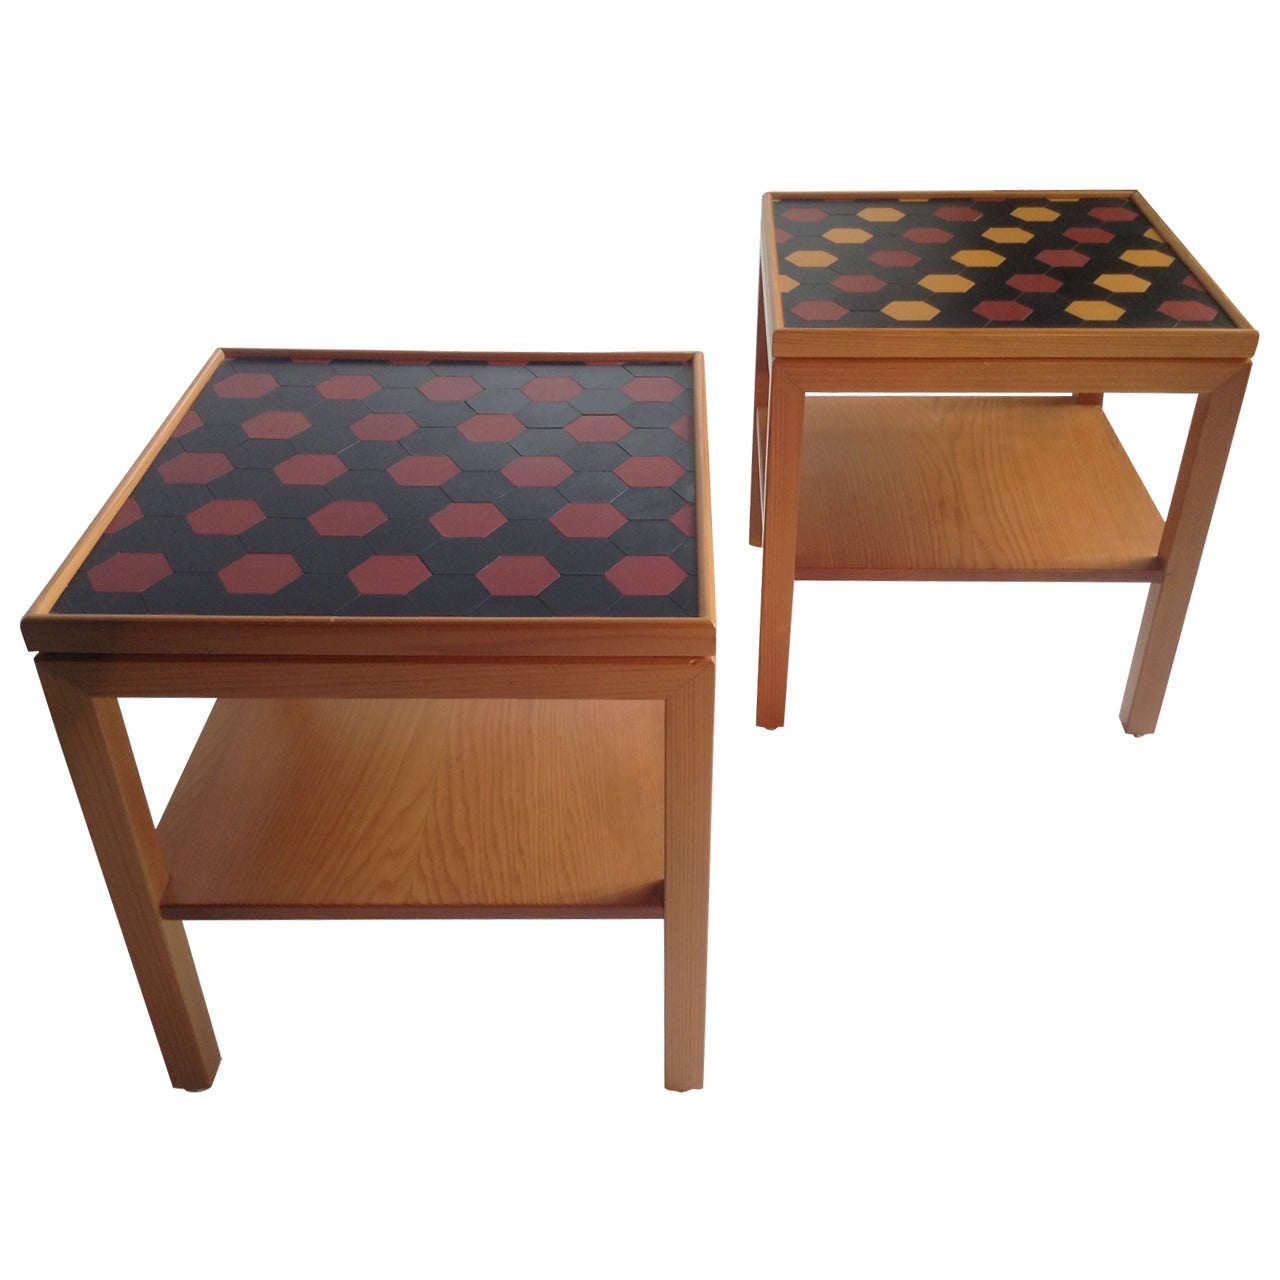 Modernist Pearwood and Leather Tray Tables, Emanuela Frattini